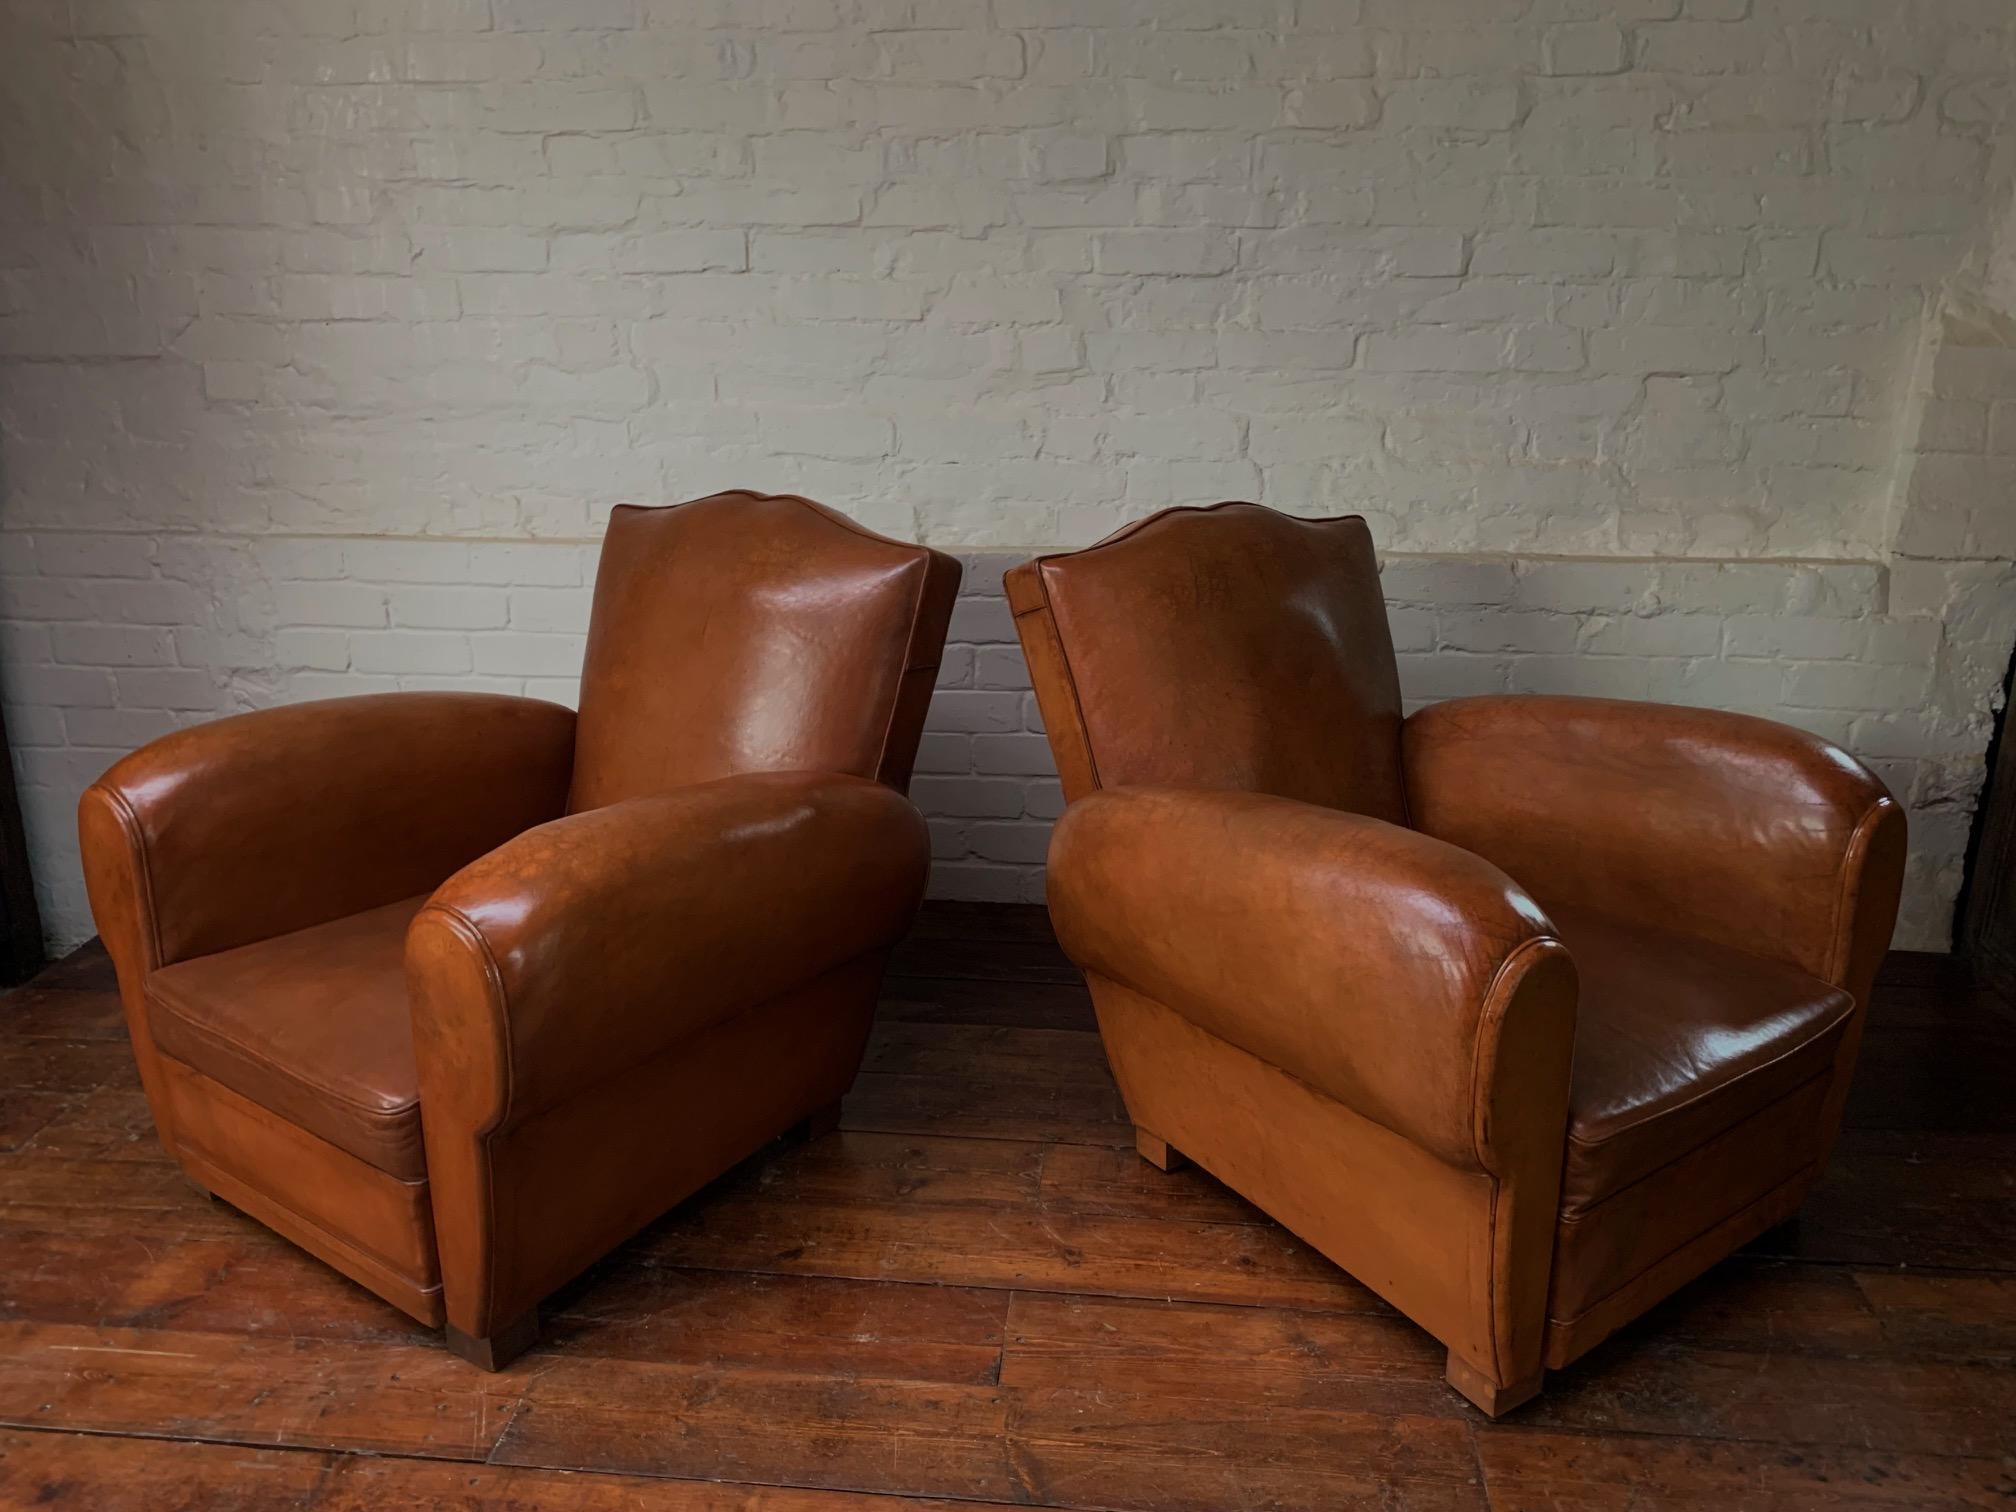 Art Deco A Stunning Pair of French Leather Club Chairs, Caramel Moustache Models, C1940's